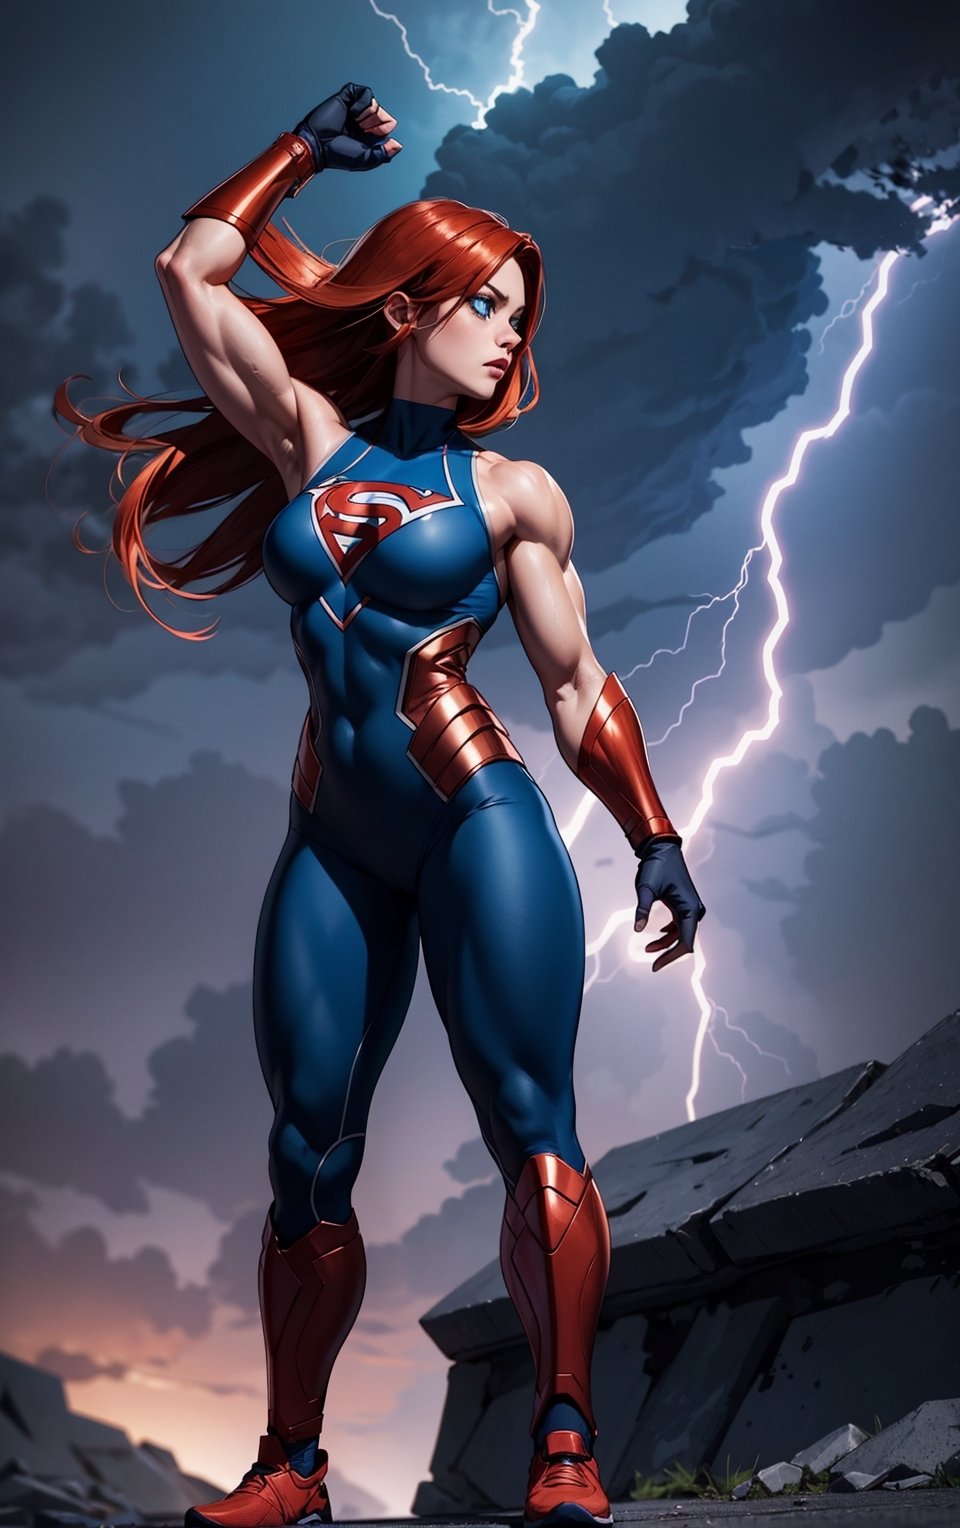 masterpiece,  best quality,  Very muscular woman
outdoors,  A very muscular woman, hands well shown,  standing, superhero style leggings, Dramatic lighting, Night time, Thunderstorm background, blue eyes, copper hair, High detailed,